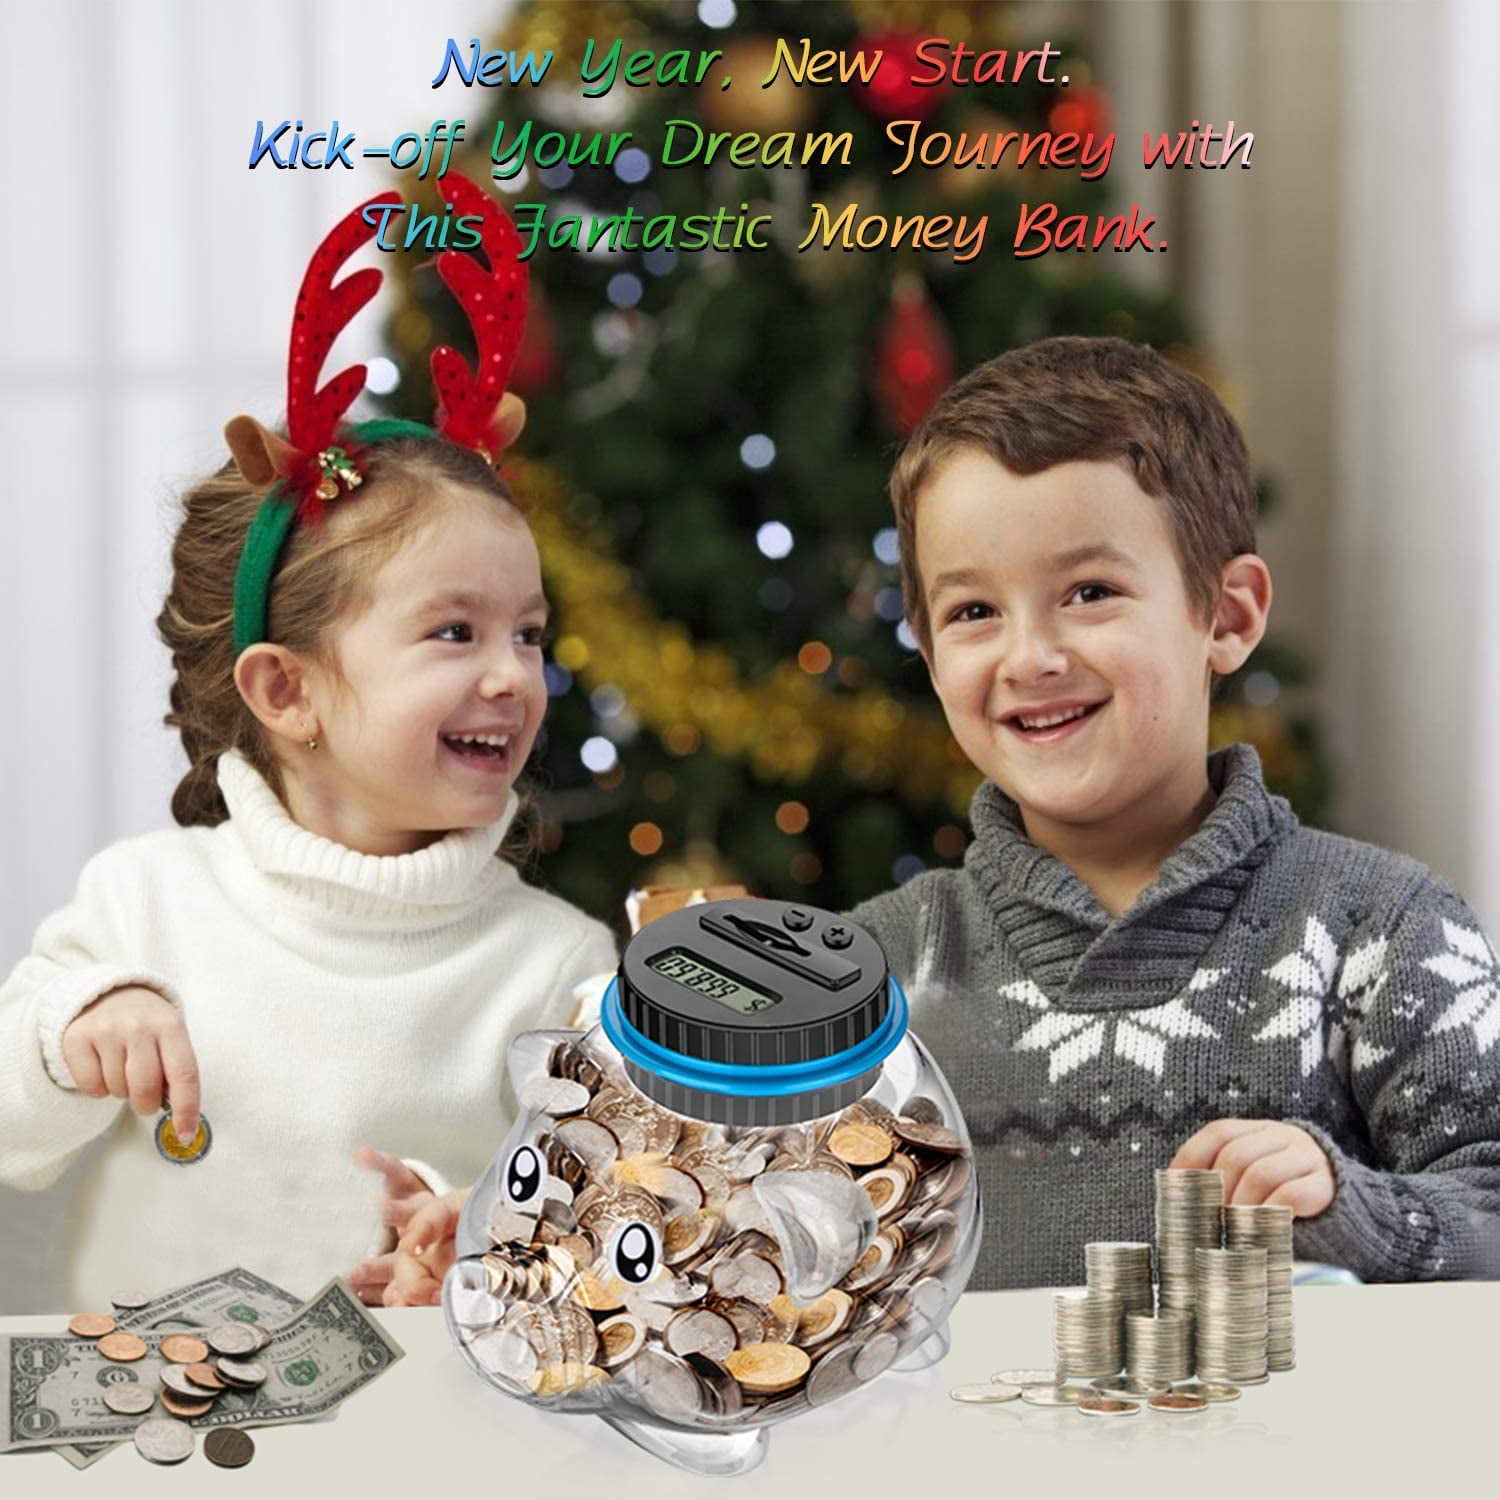 Novelty Items Large Capacity Electronic Piggy Bank Digital LCD Counting Coin  Counter Bank Coin Money Saving Box For USD EURO Kids Adults Gifts 230830  From Tuo10, $14.43